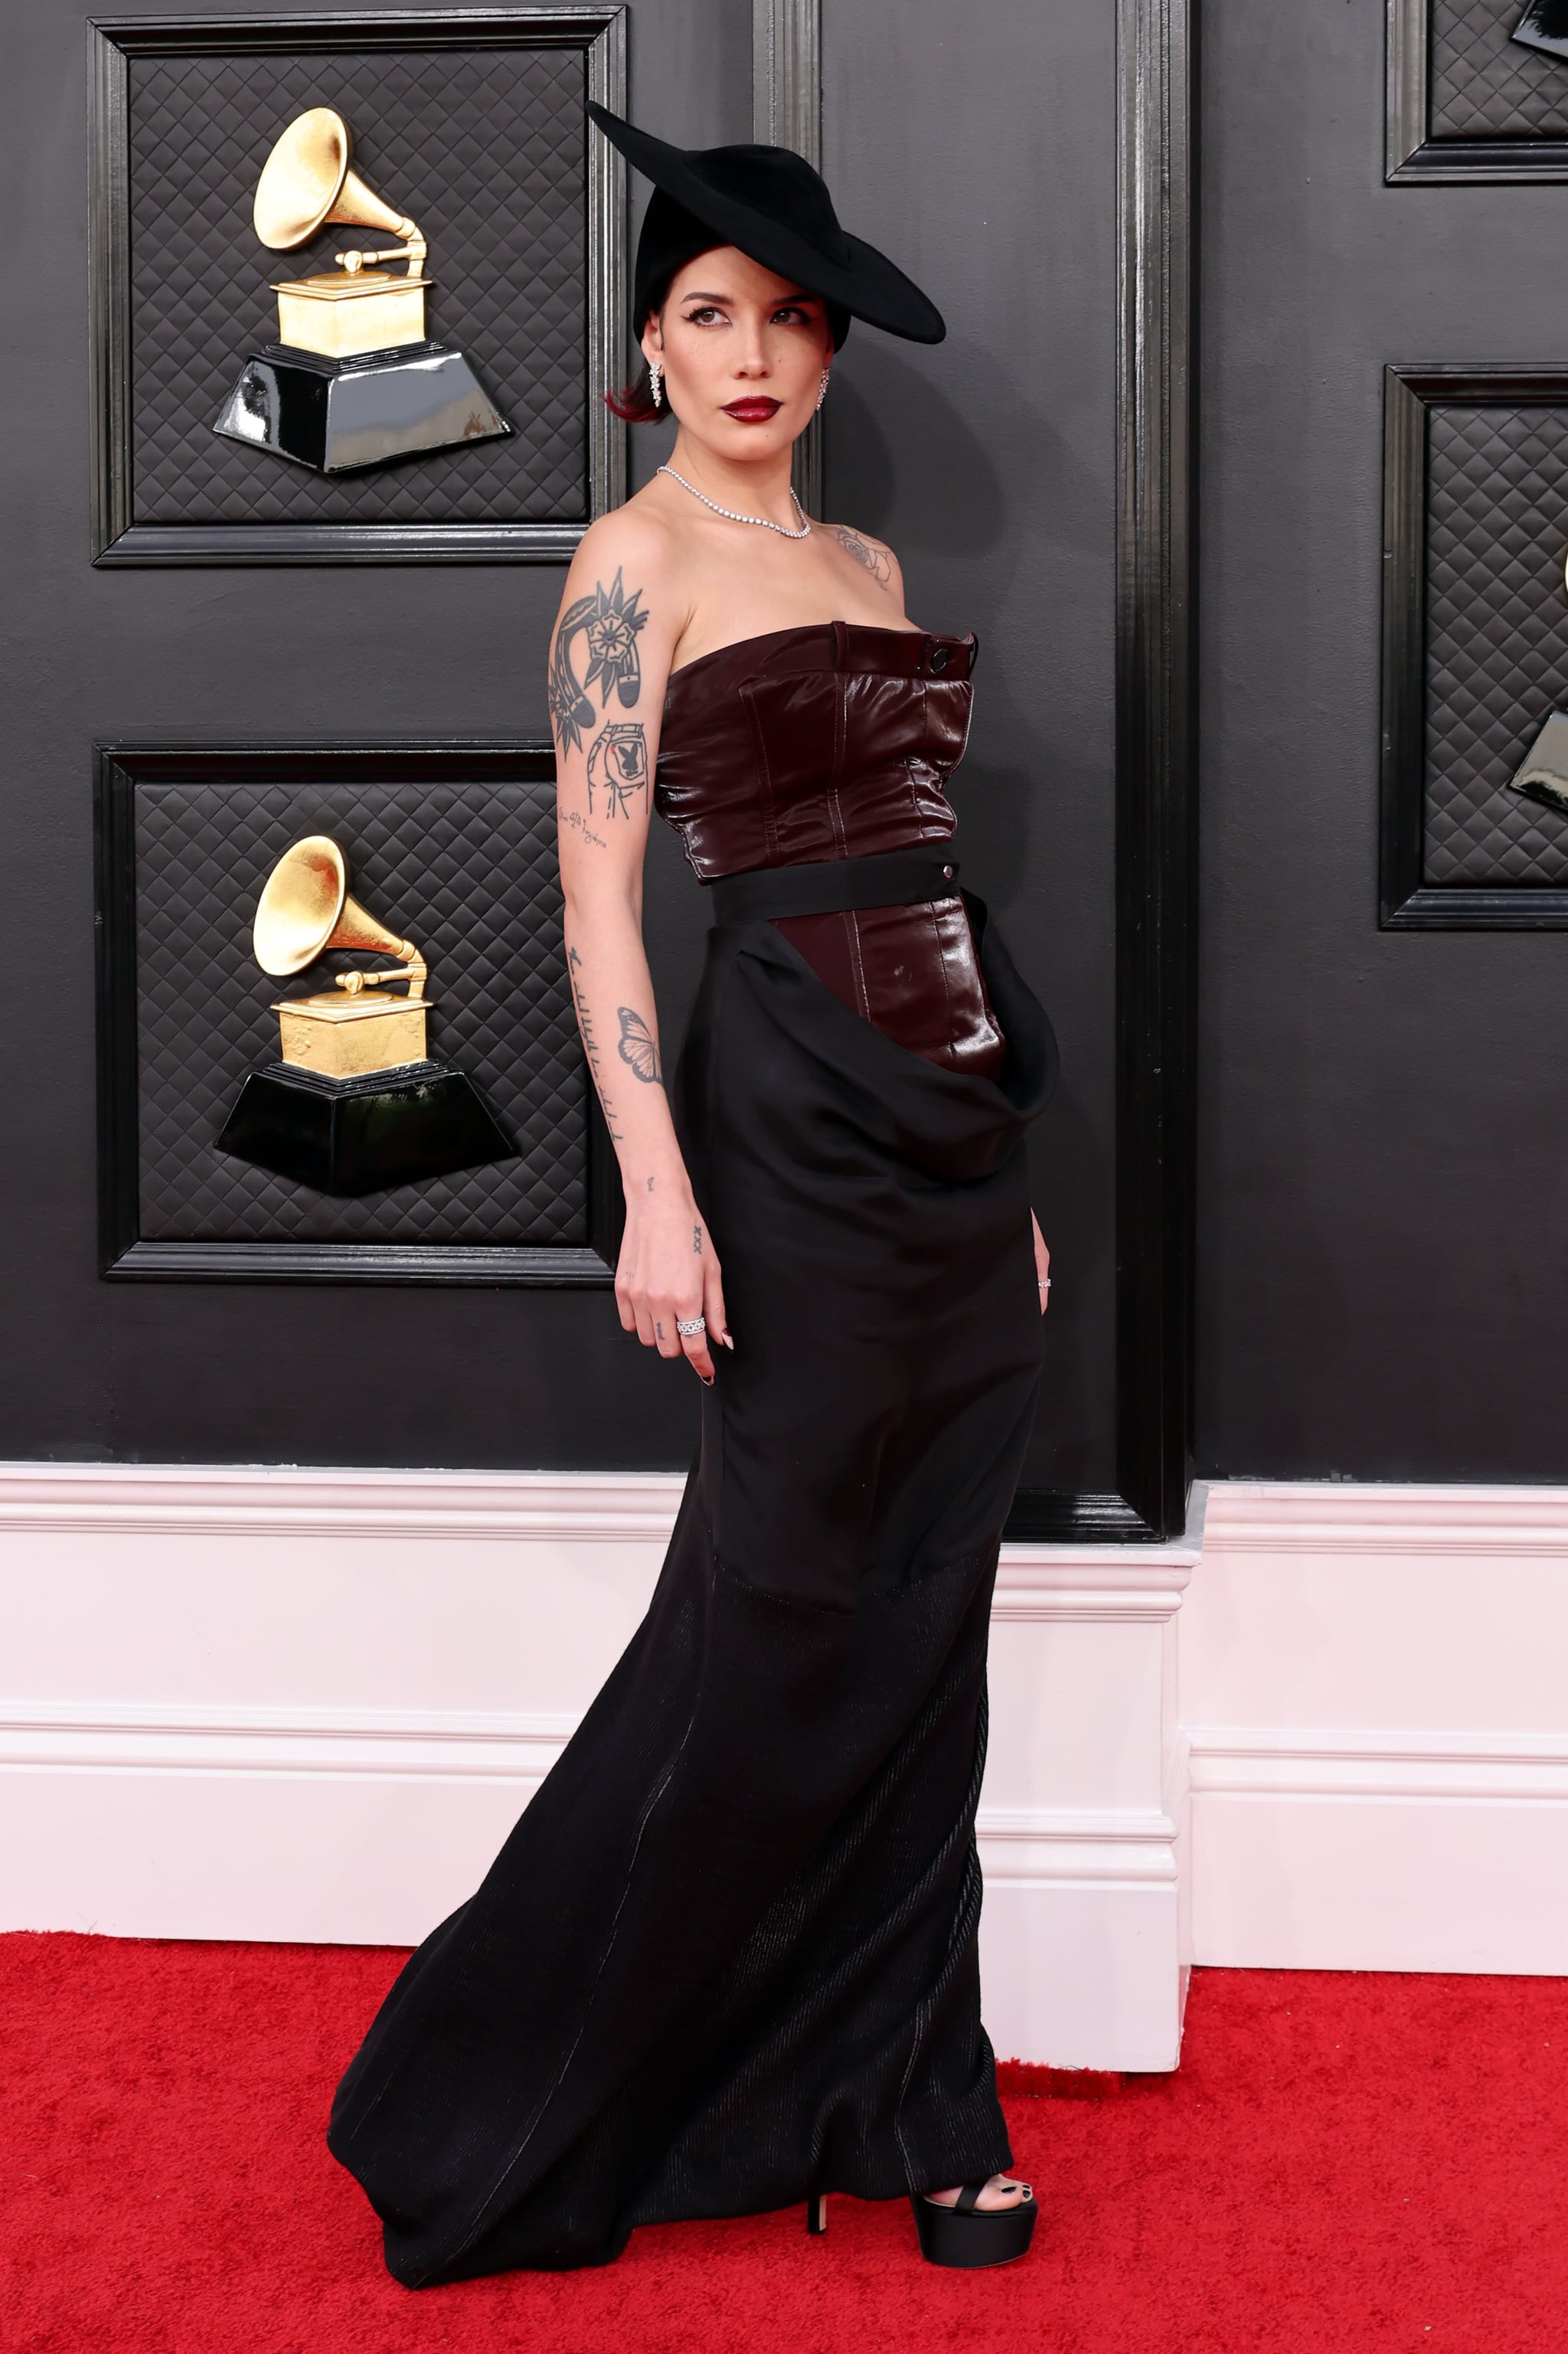 LAS VEGAS, NEVADA - APRIL 03: Halsey attends the 64th Annual GRAMMY Awards at MGM Grand Garden Arena on April 03, 2022 in Las Vegas, Nevada.  (Photo by Amy Sussman/Getty Images)